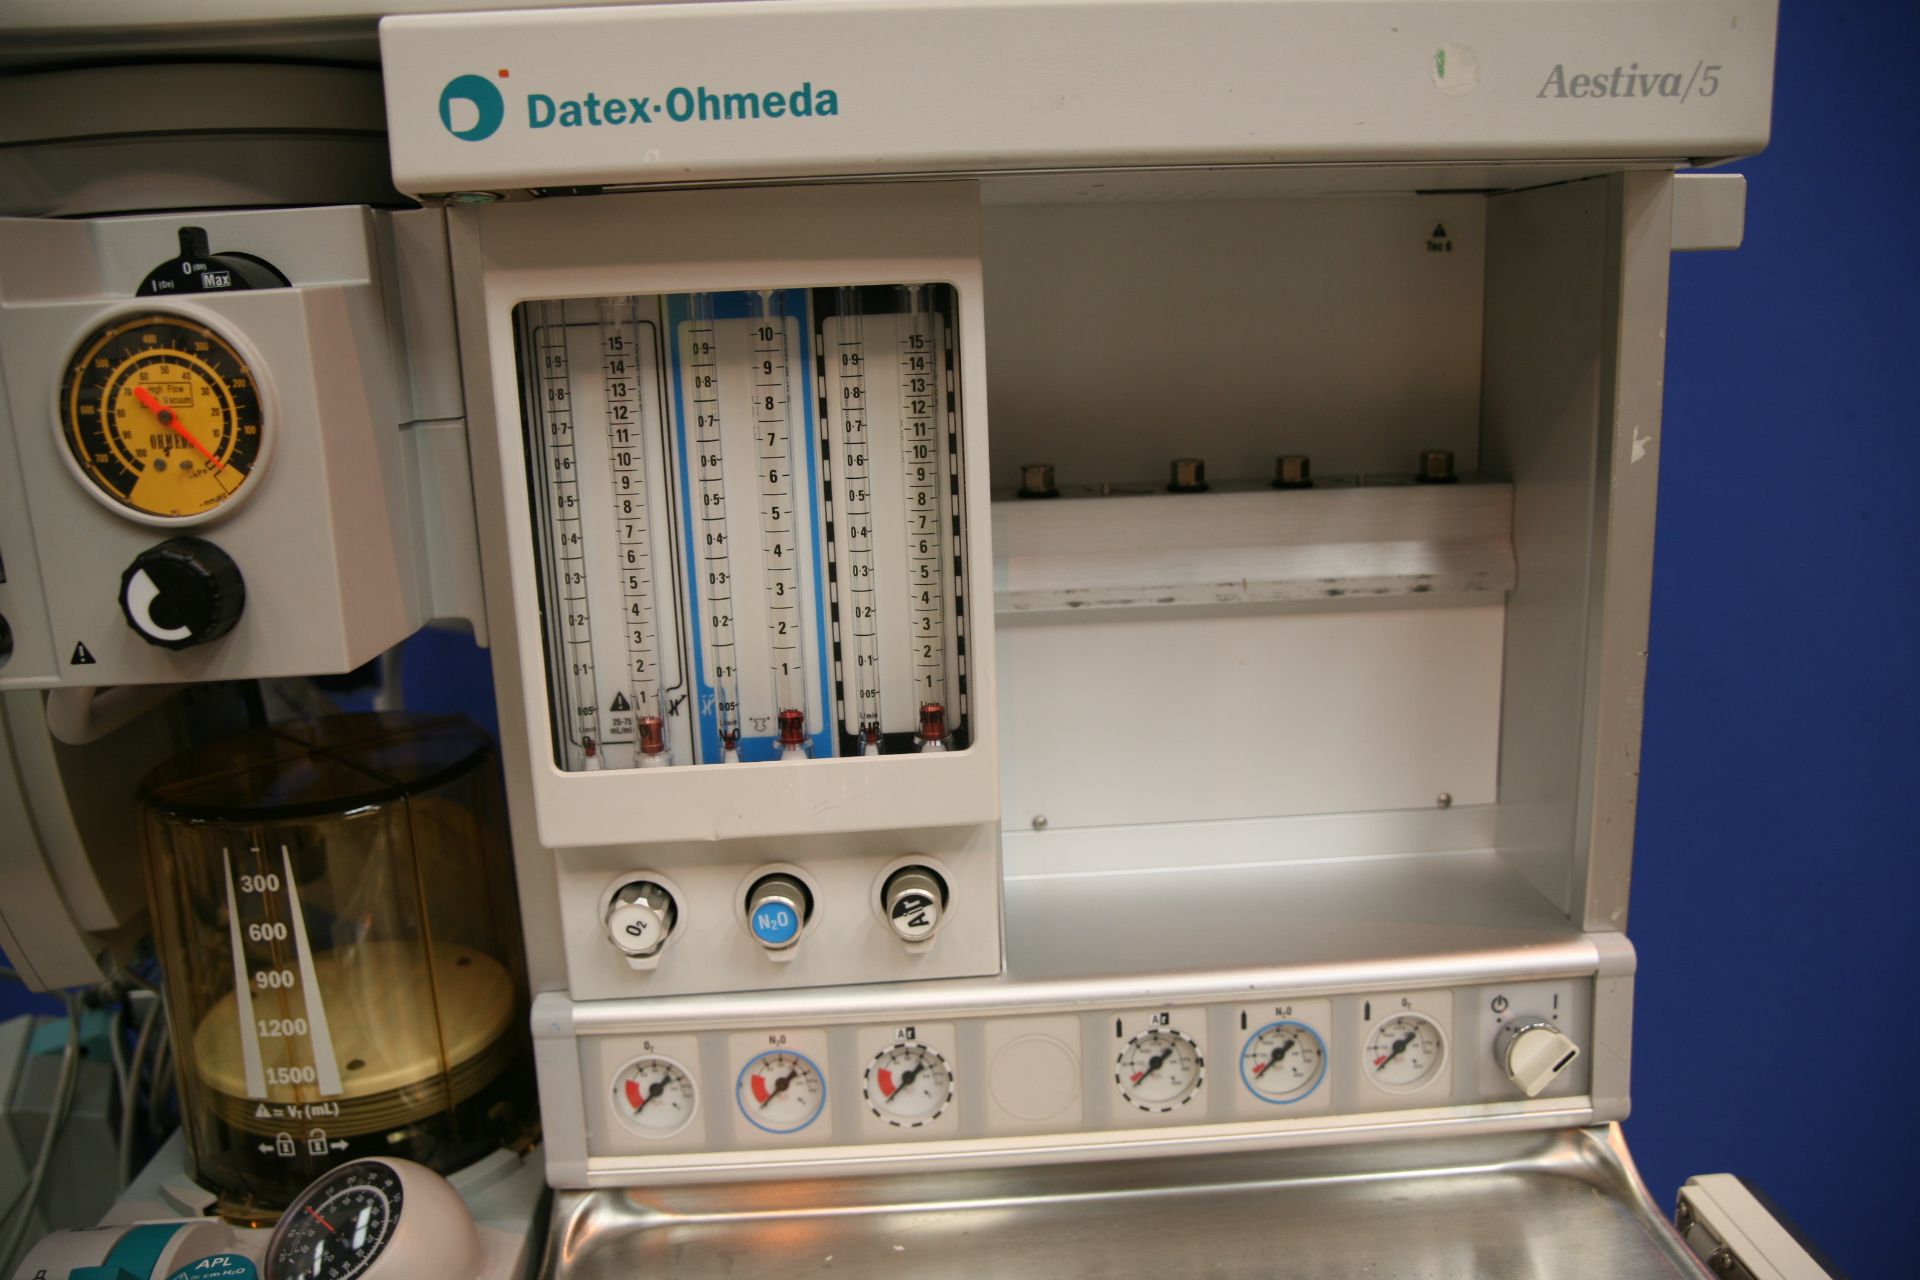 Datex Ohmeda Aestiva 5 Anaethesia Trolley With Agilent Anaesthesia CMS 2002 Monitor, Smart Vent, - Image 3 of 6